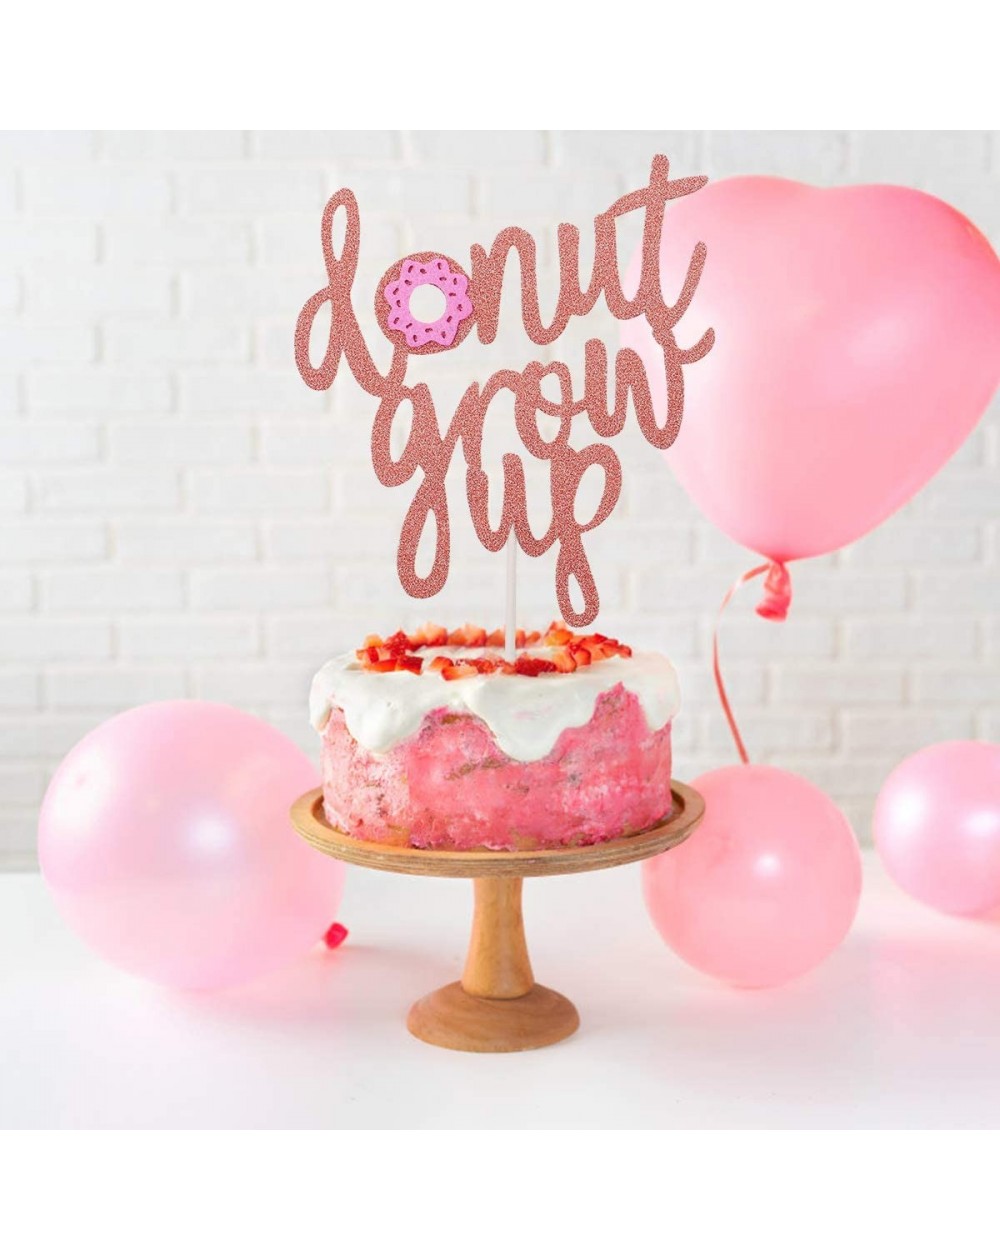 Cake & Cupcake Toppers Rose Gold Donut Grow Up Cake Topper - Glitter Double Sided Donut Cake Decorations - Donut Birthday The...